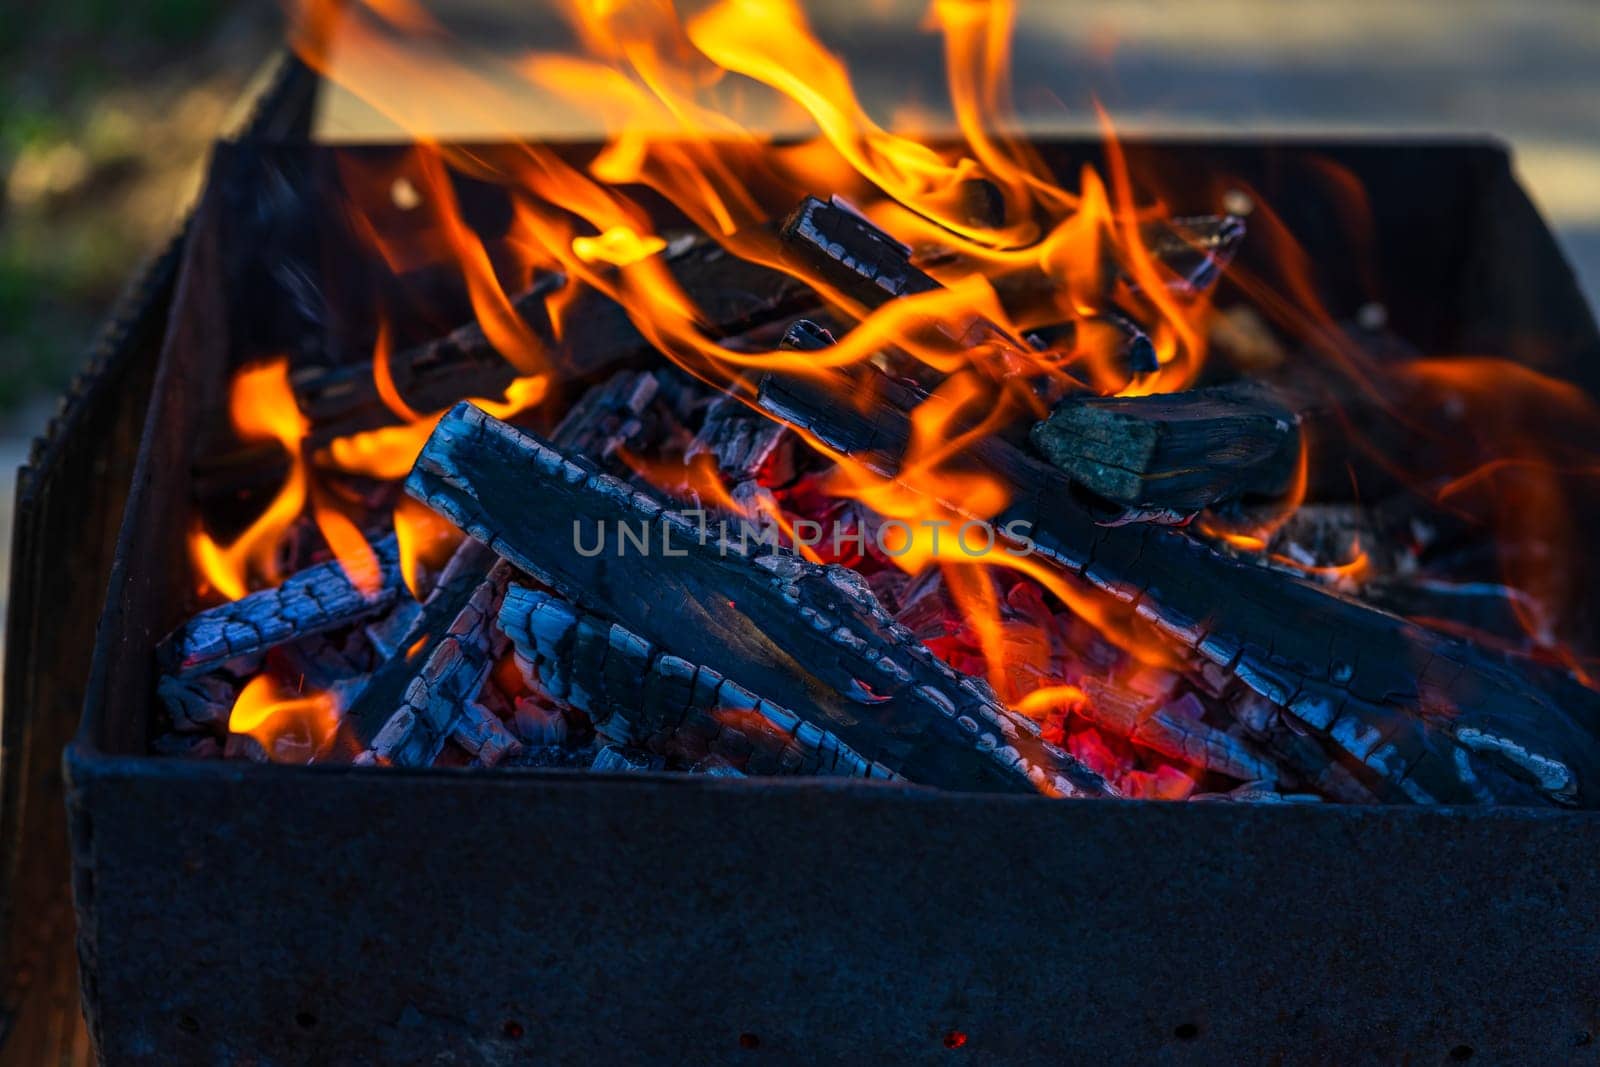 Burning wood chips to form coal. Barbecue preparation, fire before cooking.